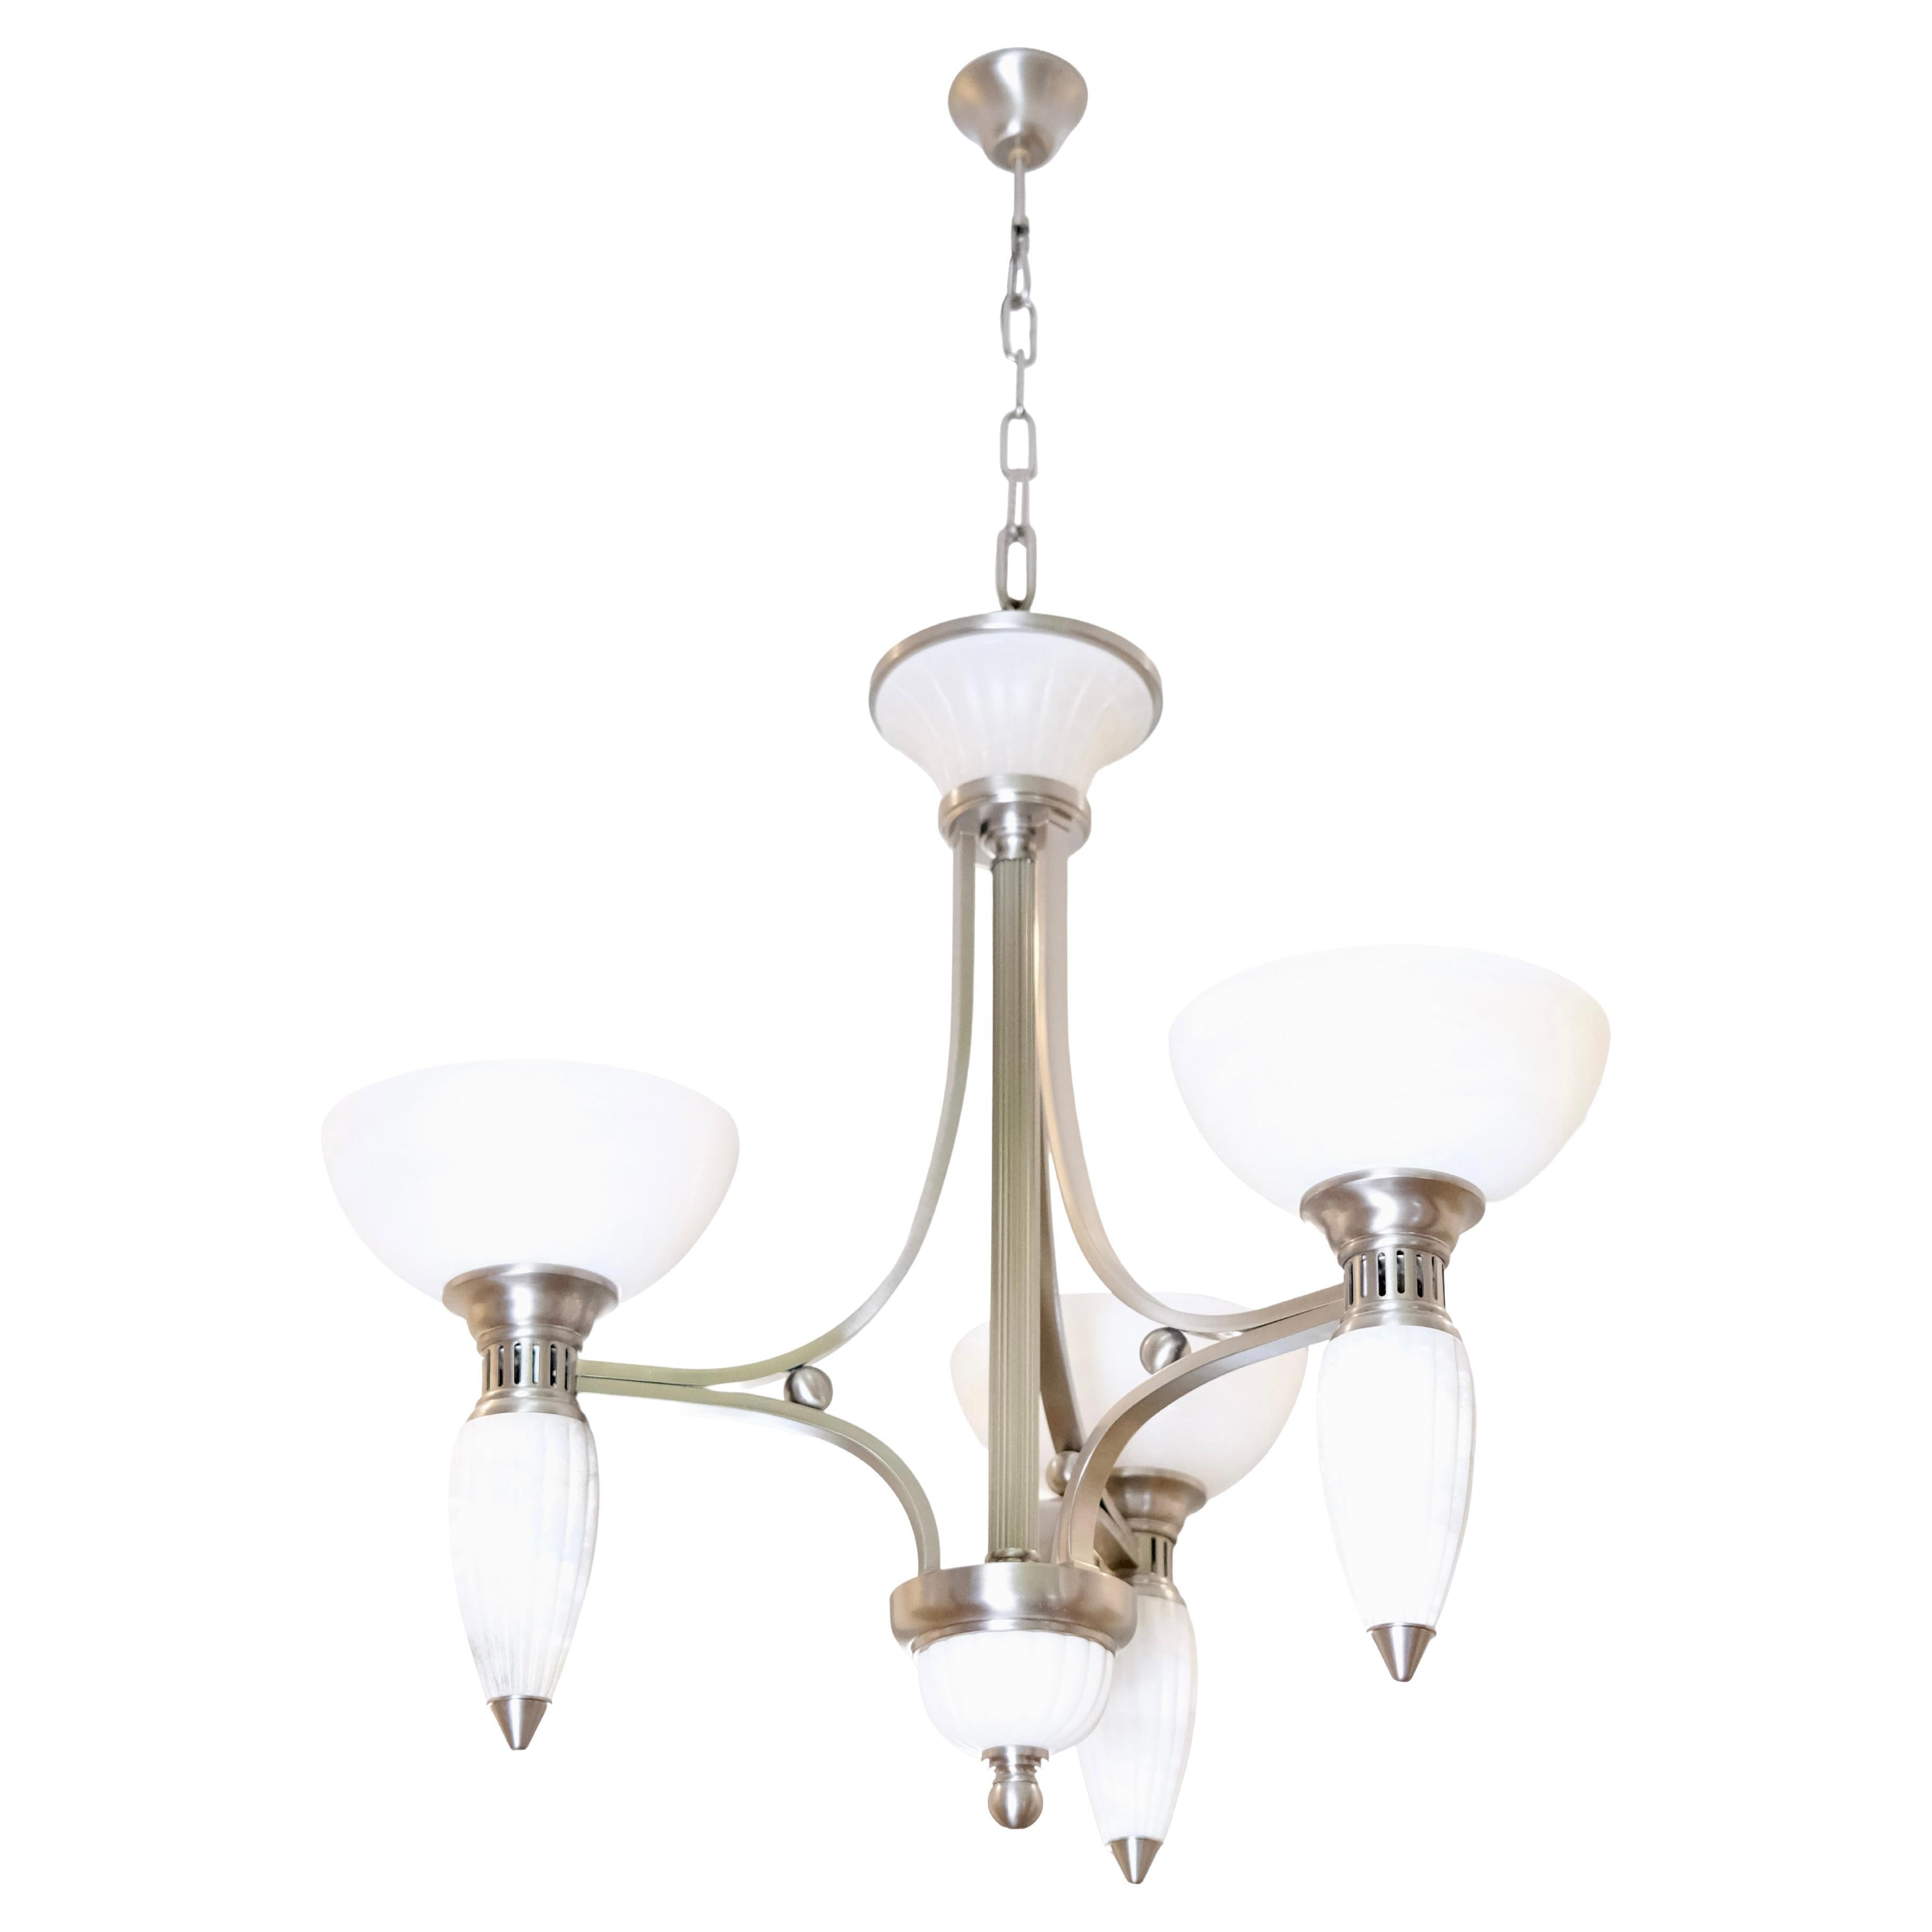 3-Arm Art Deco Style Chandelier with Alabaster Bowls and Illuminated Cones For Sale